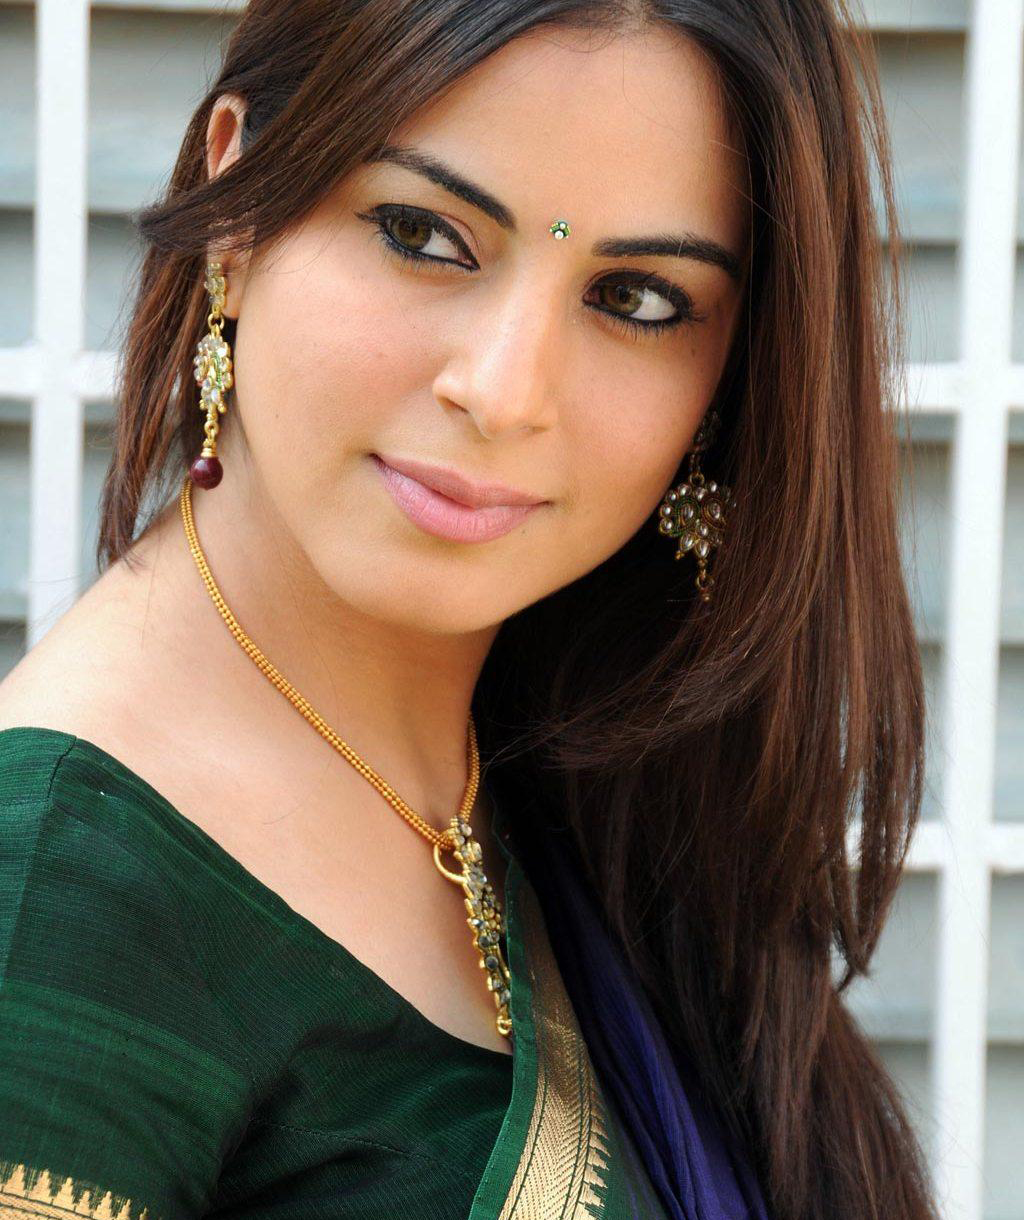 Shraddha arya photos pictures wallpapers